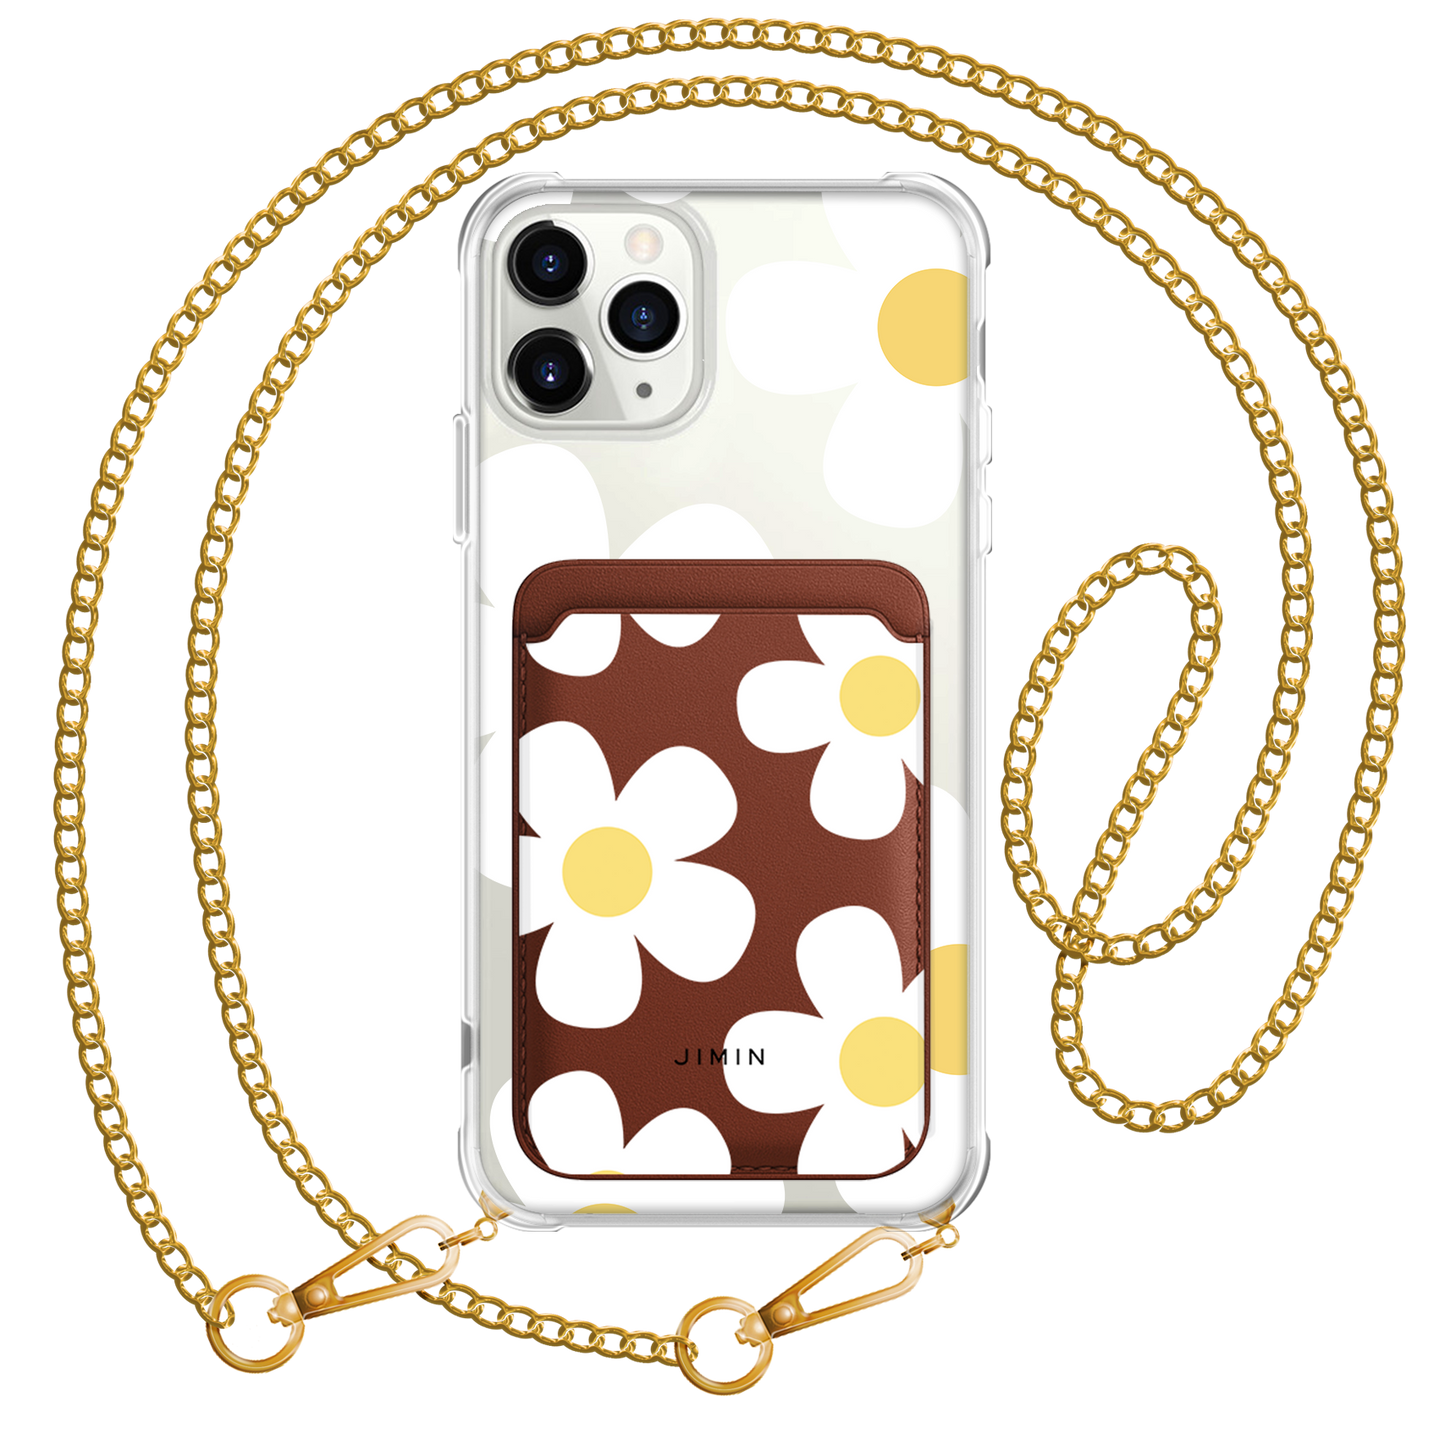 iPhone Magnetic Wallet Case - Daisy 4.0